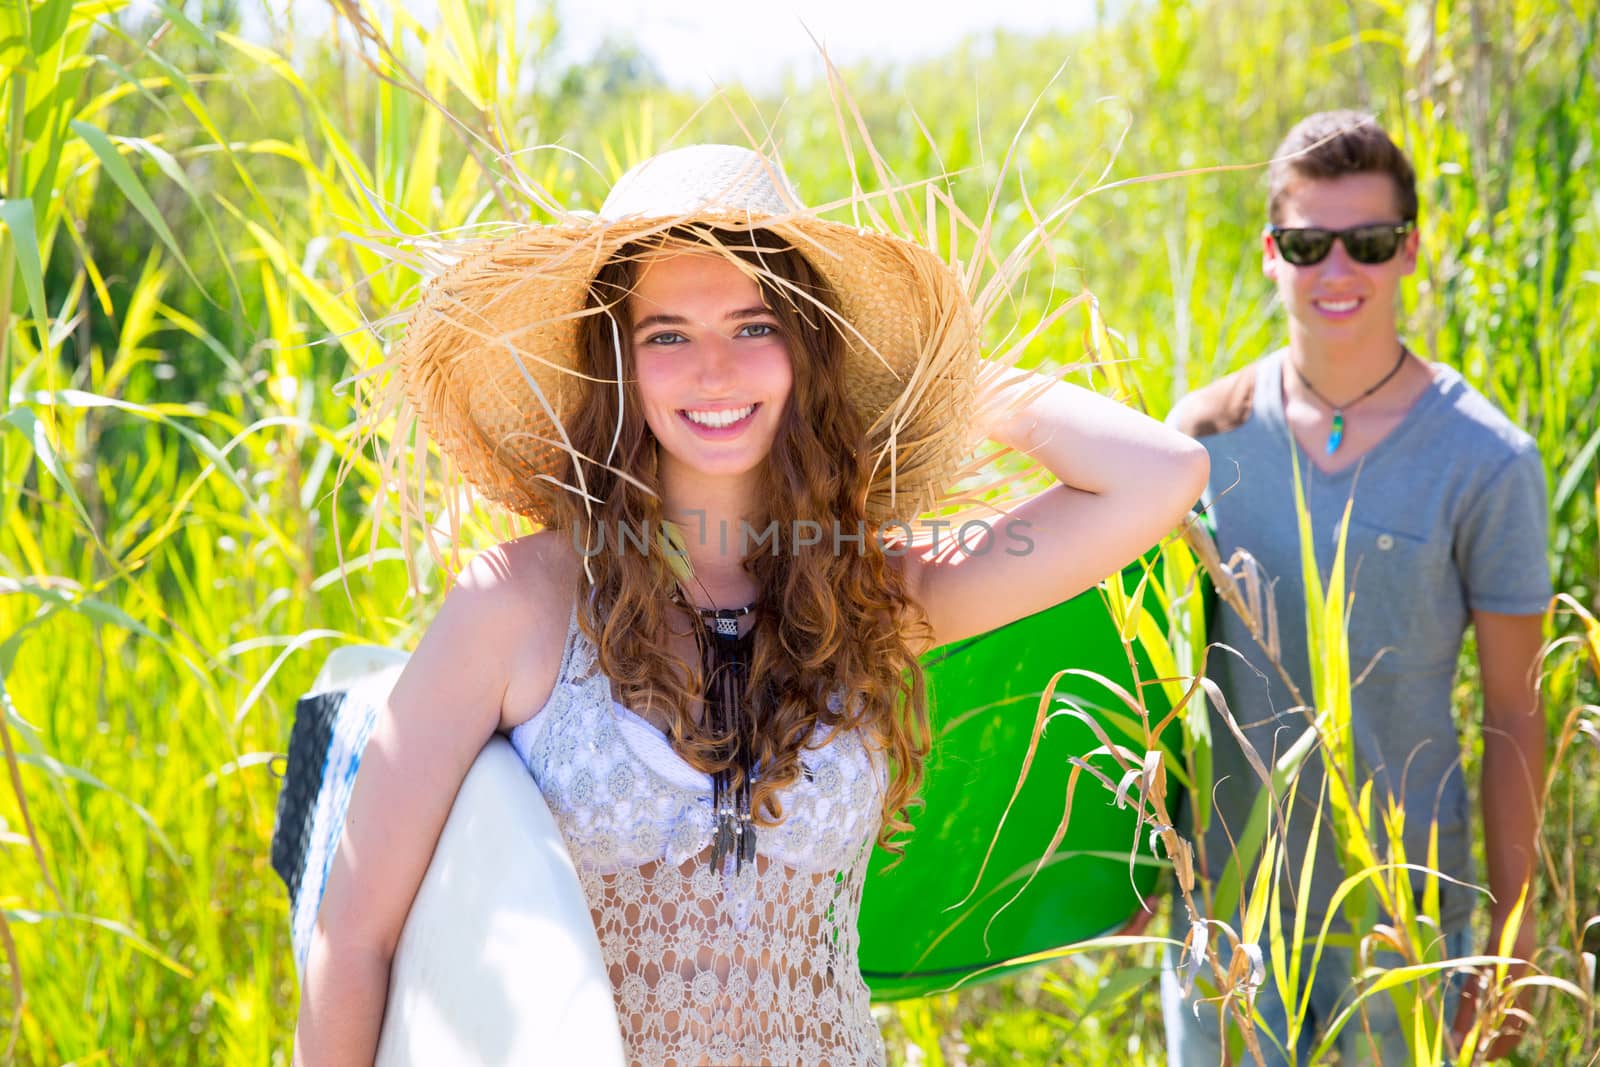 Girl surfer with beach hat walking with surfboard and her friend